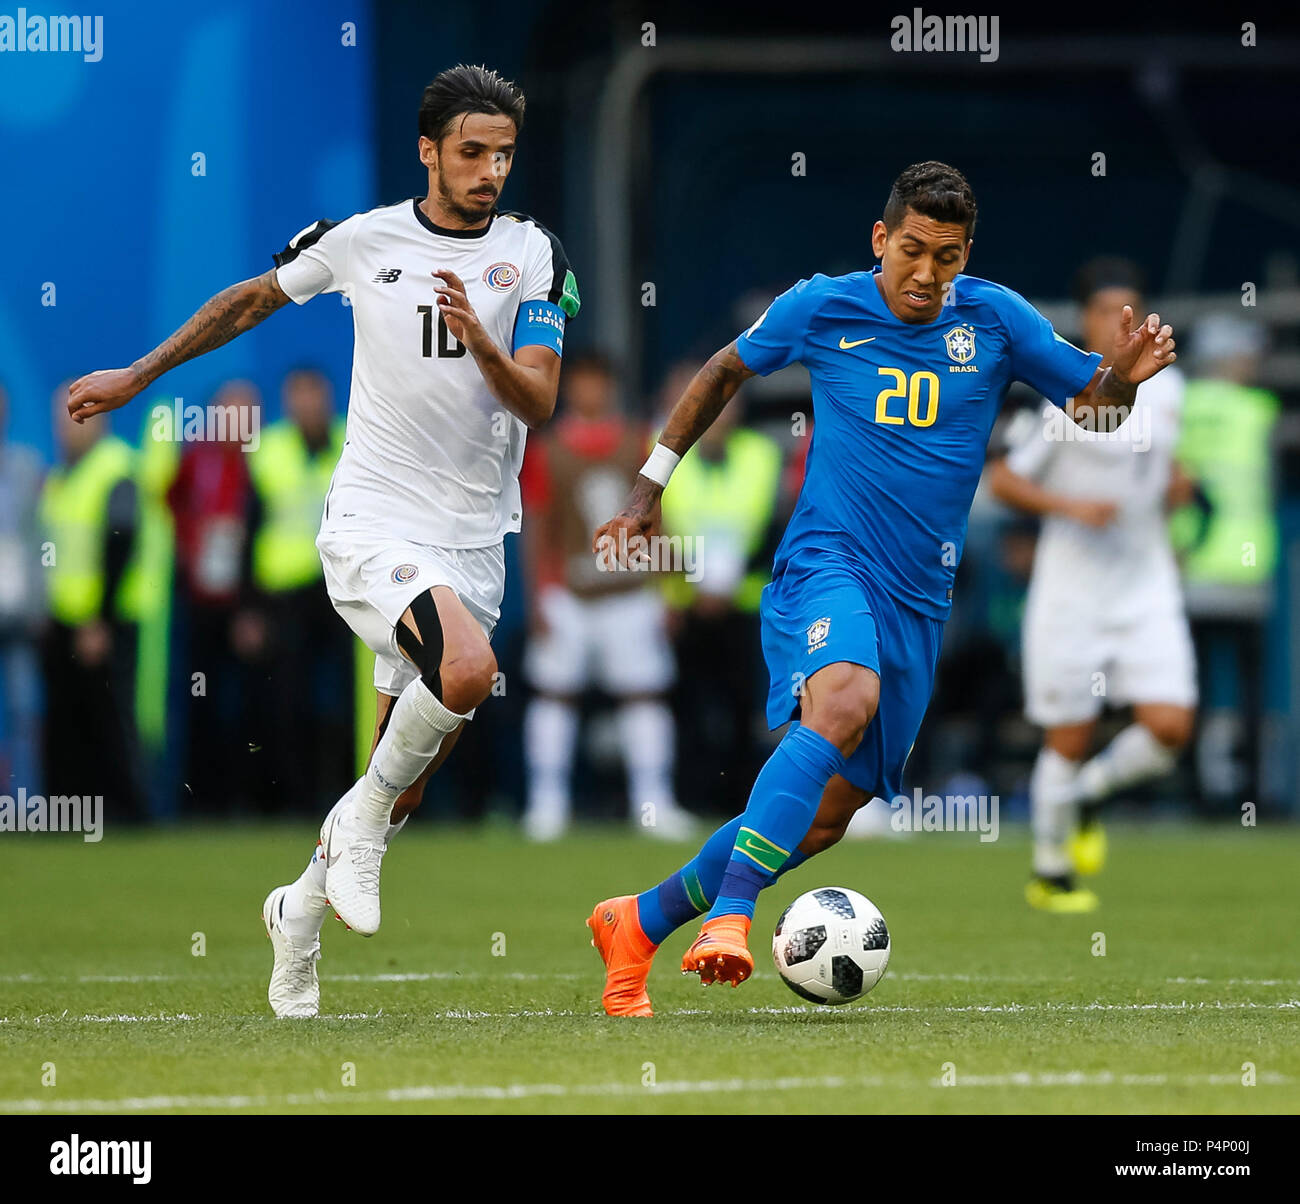 Saint Petersburg, Russia. 22nd June 2018. Bryan Ruiz of Costa Rica and Roberto Firmino of Brazil during the 2018 FIFA World Cup Group E match between Brazil and Costa Rica at Saint Petersburg Stadium on June 22nd 2018 in Saint Petersburg, Russia. (Photo by Daniel Chesterton/phcimages.com) Credit: PHC Images/Alamy Live News Stock Photo